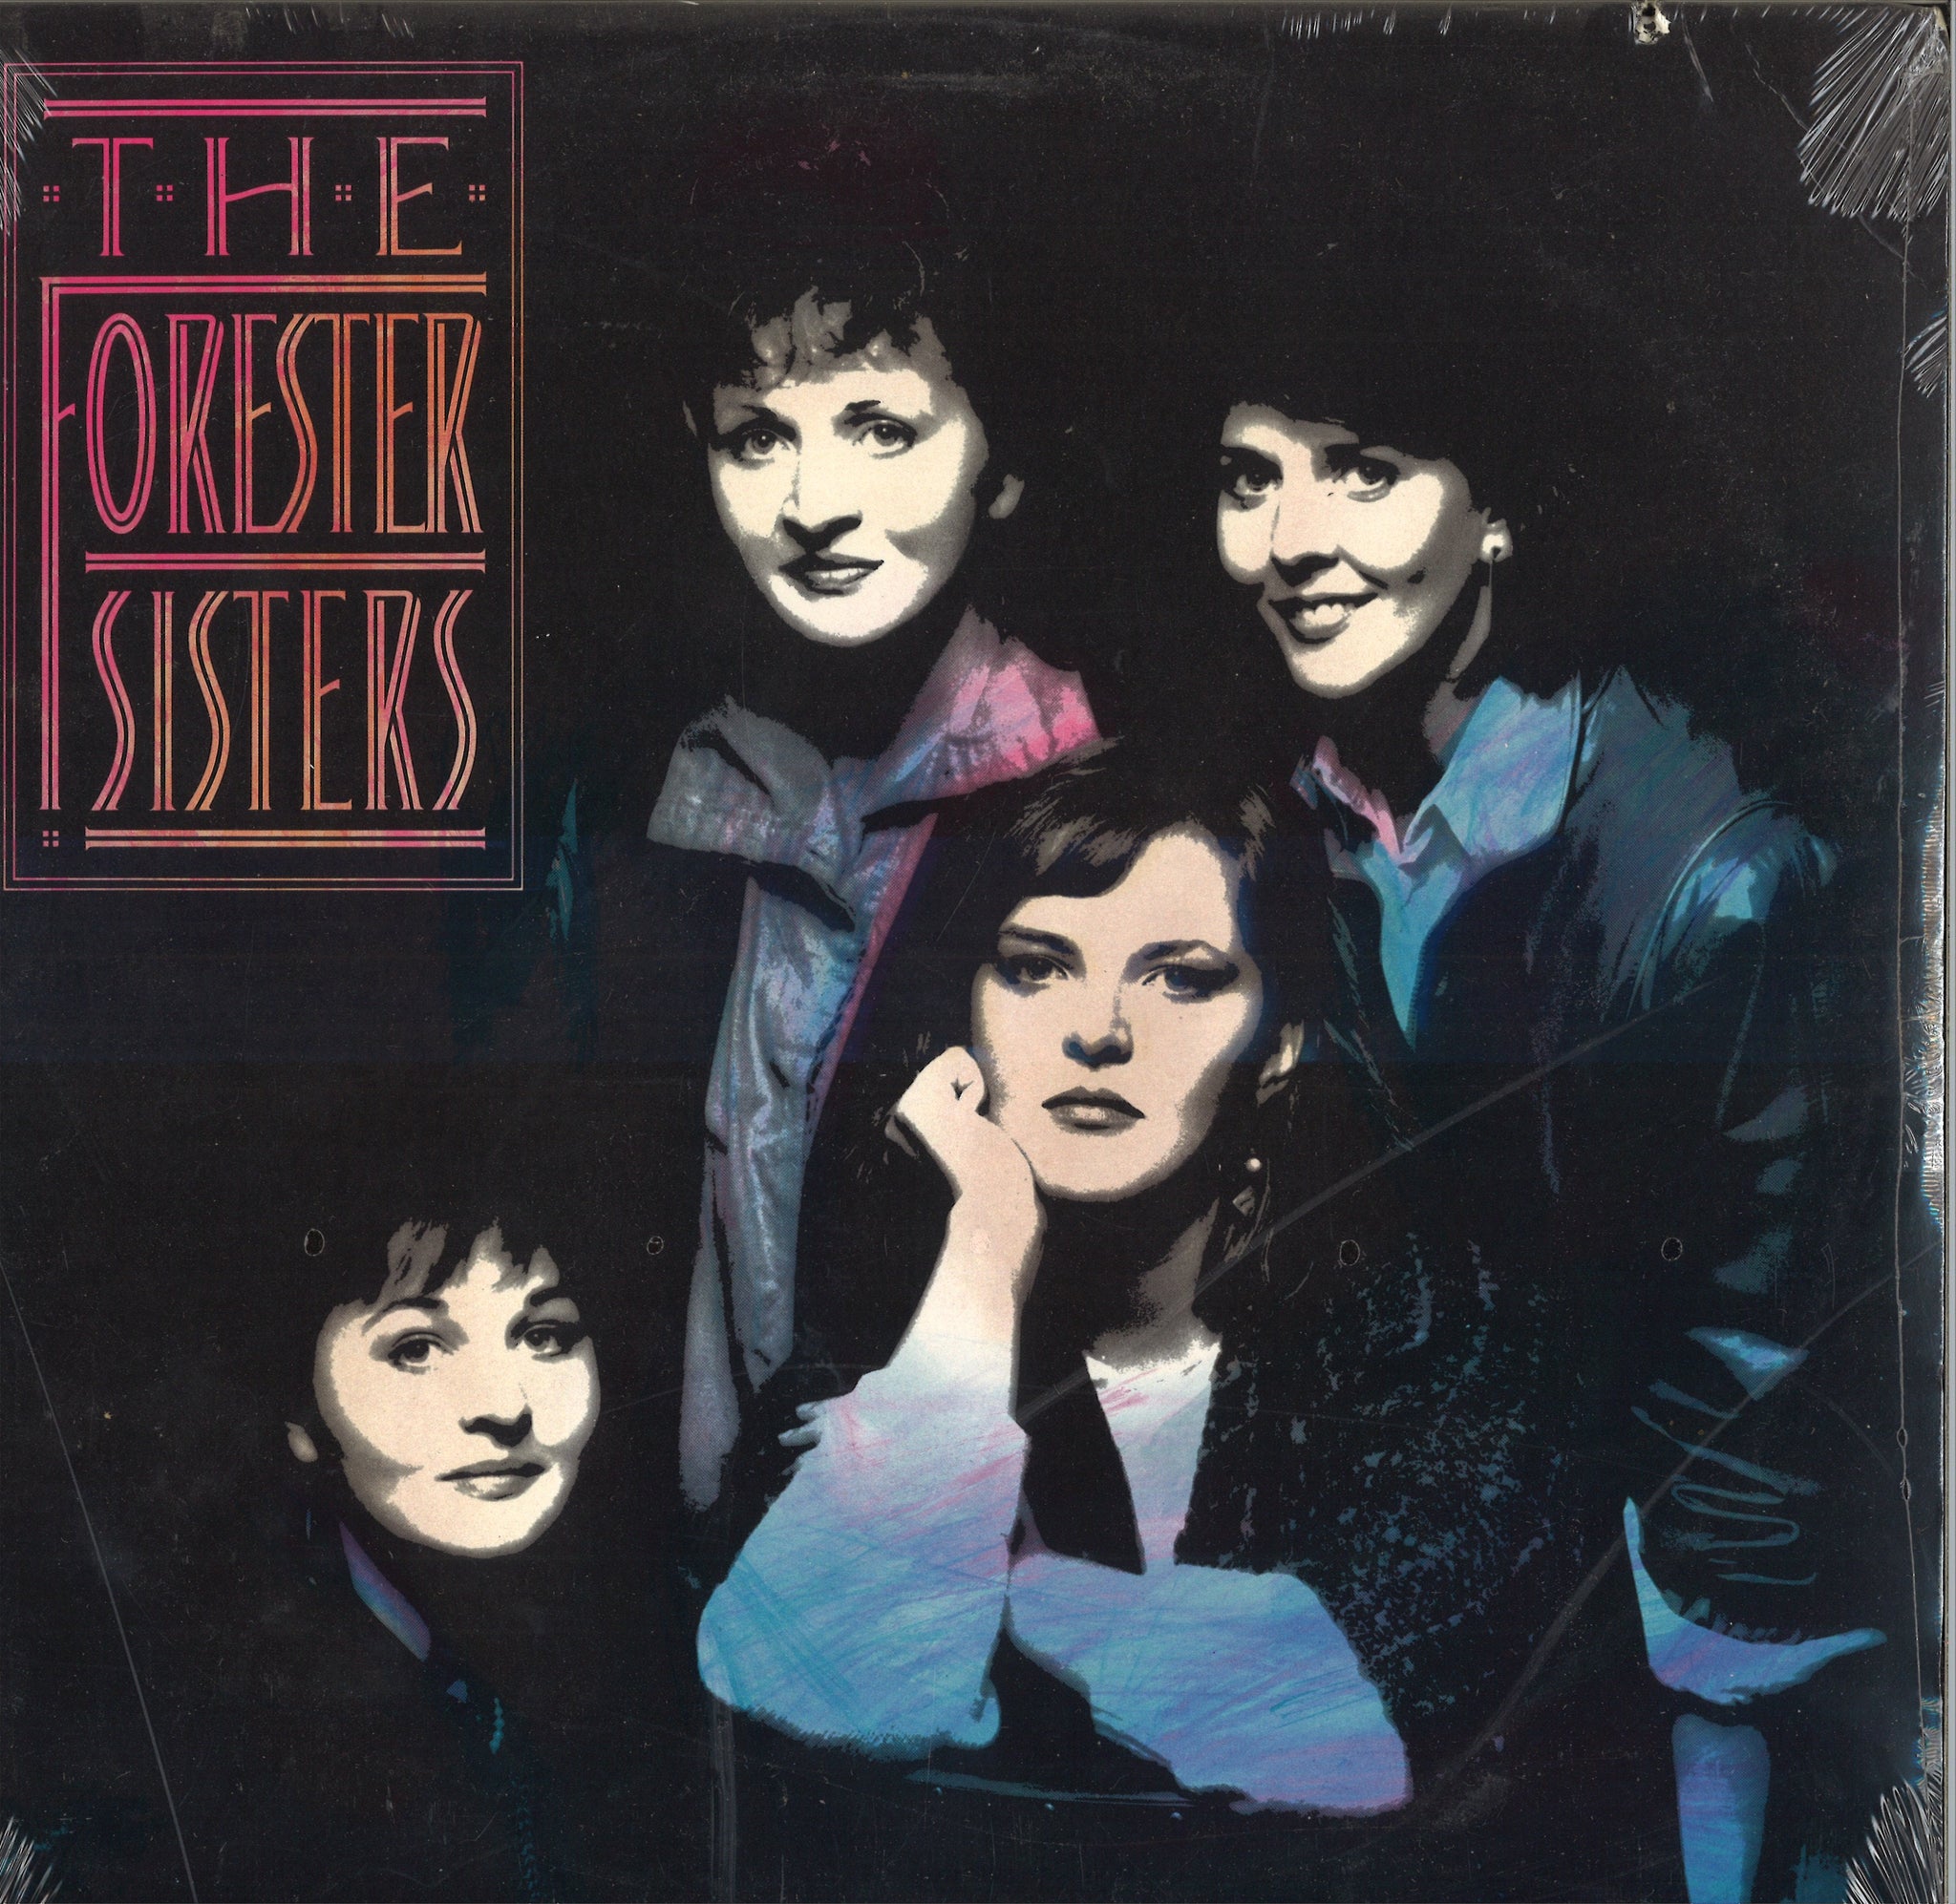 The Forester Sisters